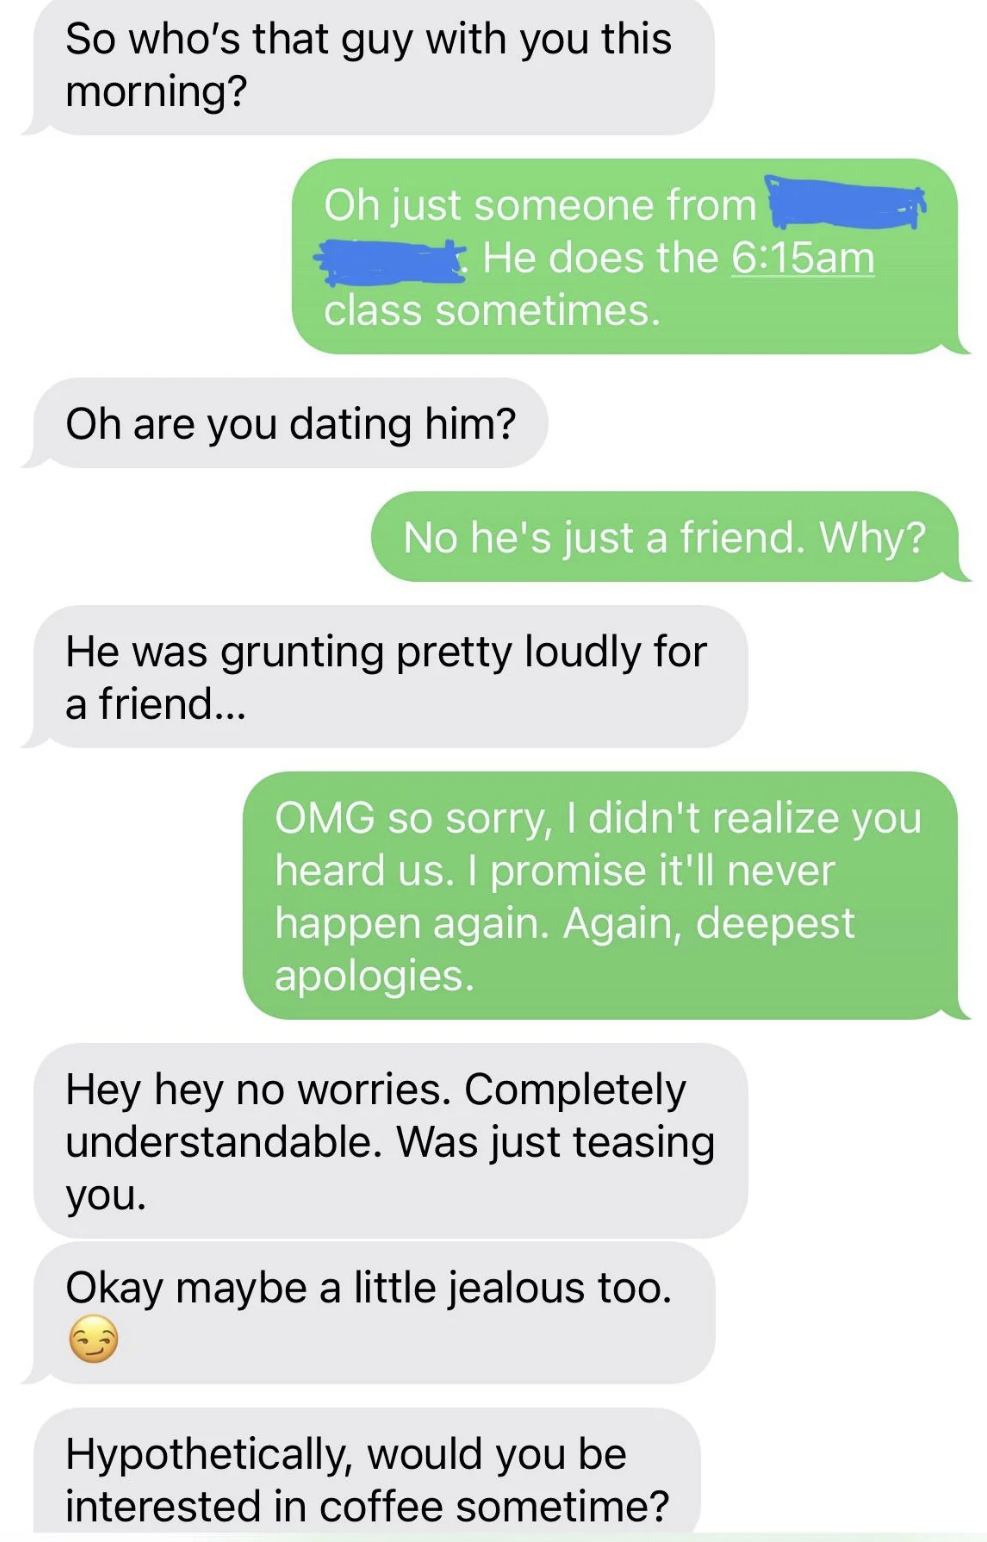 he then asks her out for coffee after admitting he was jealous there was another guy